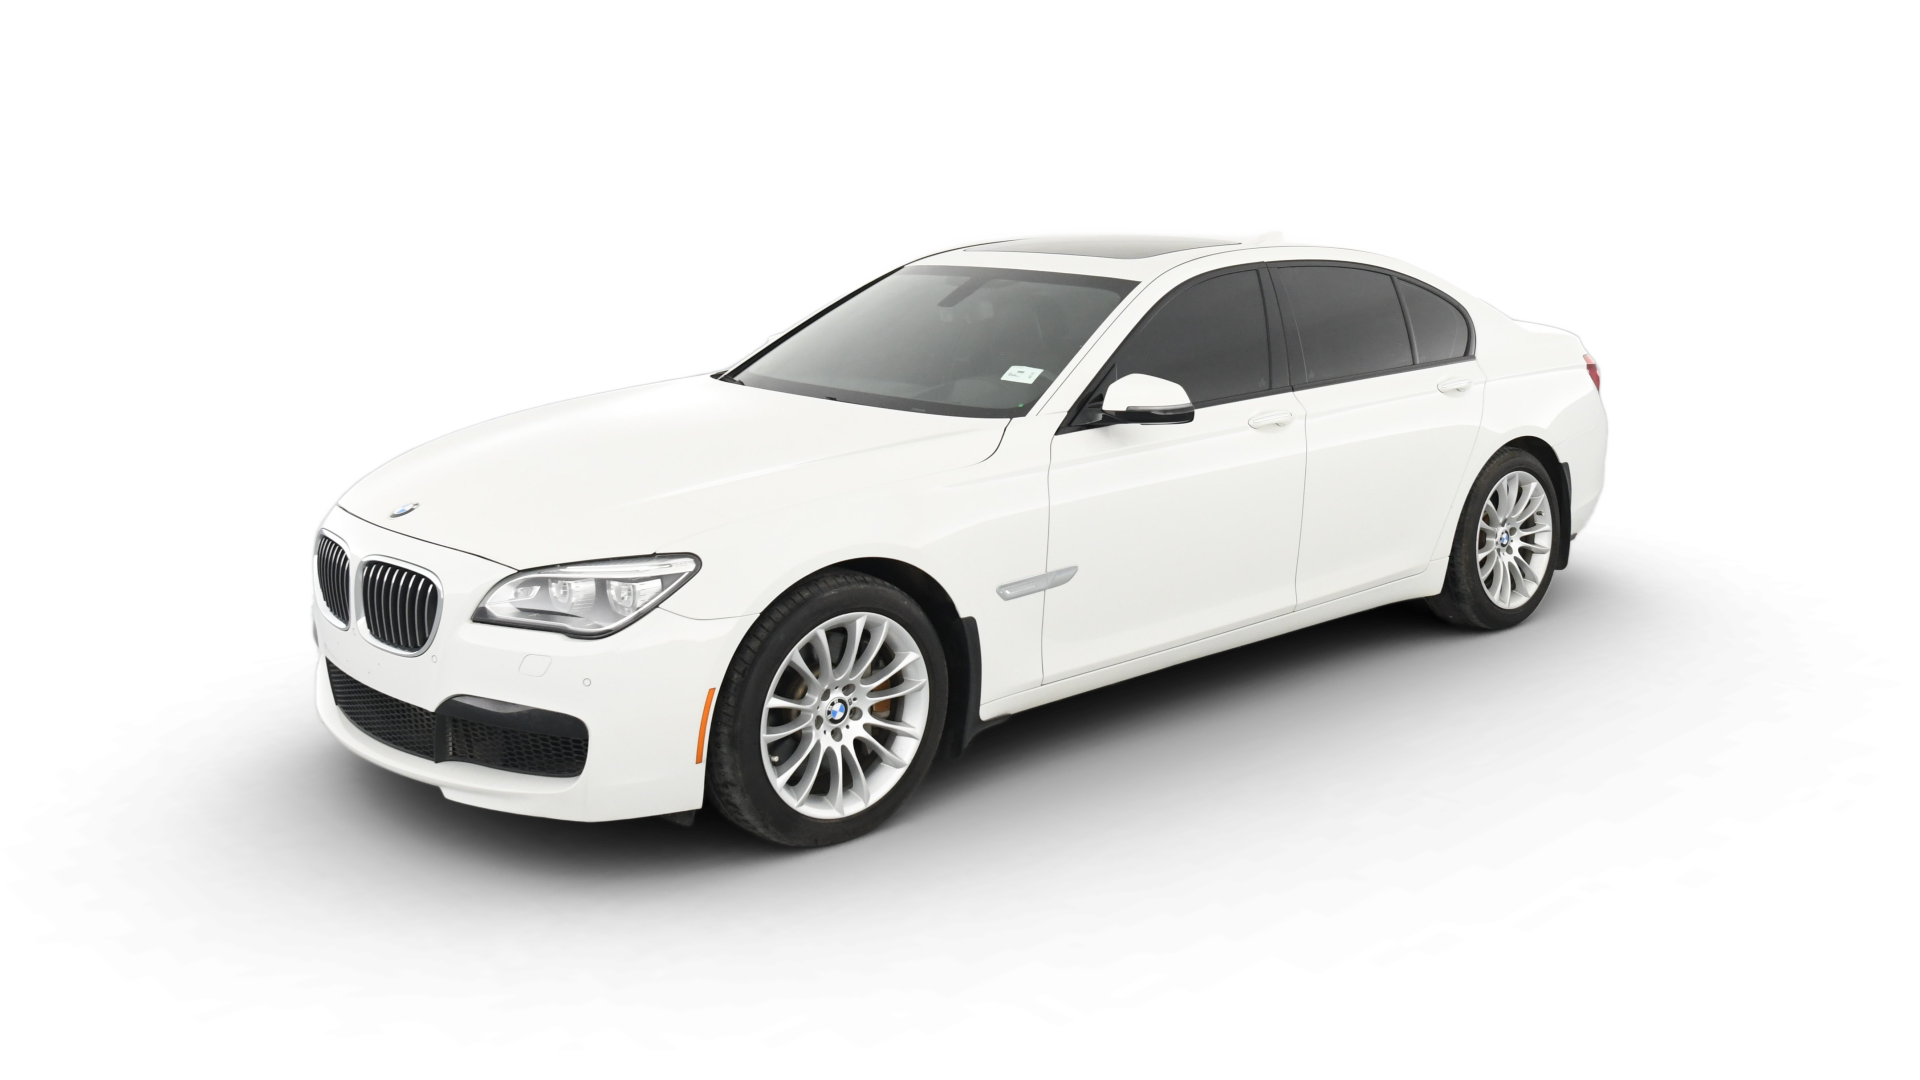 Used BMW 7 Series For Sale Online | Carvana